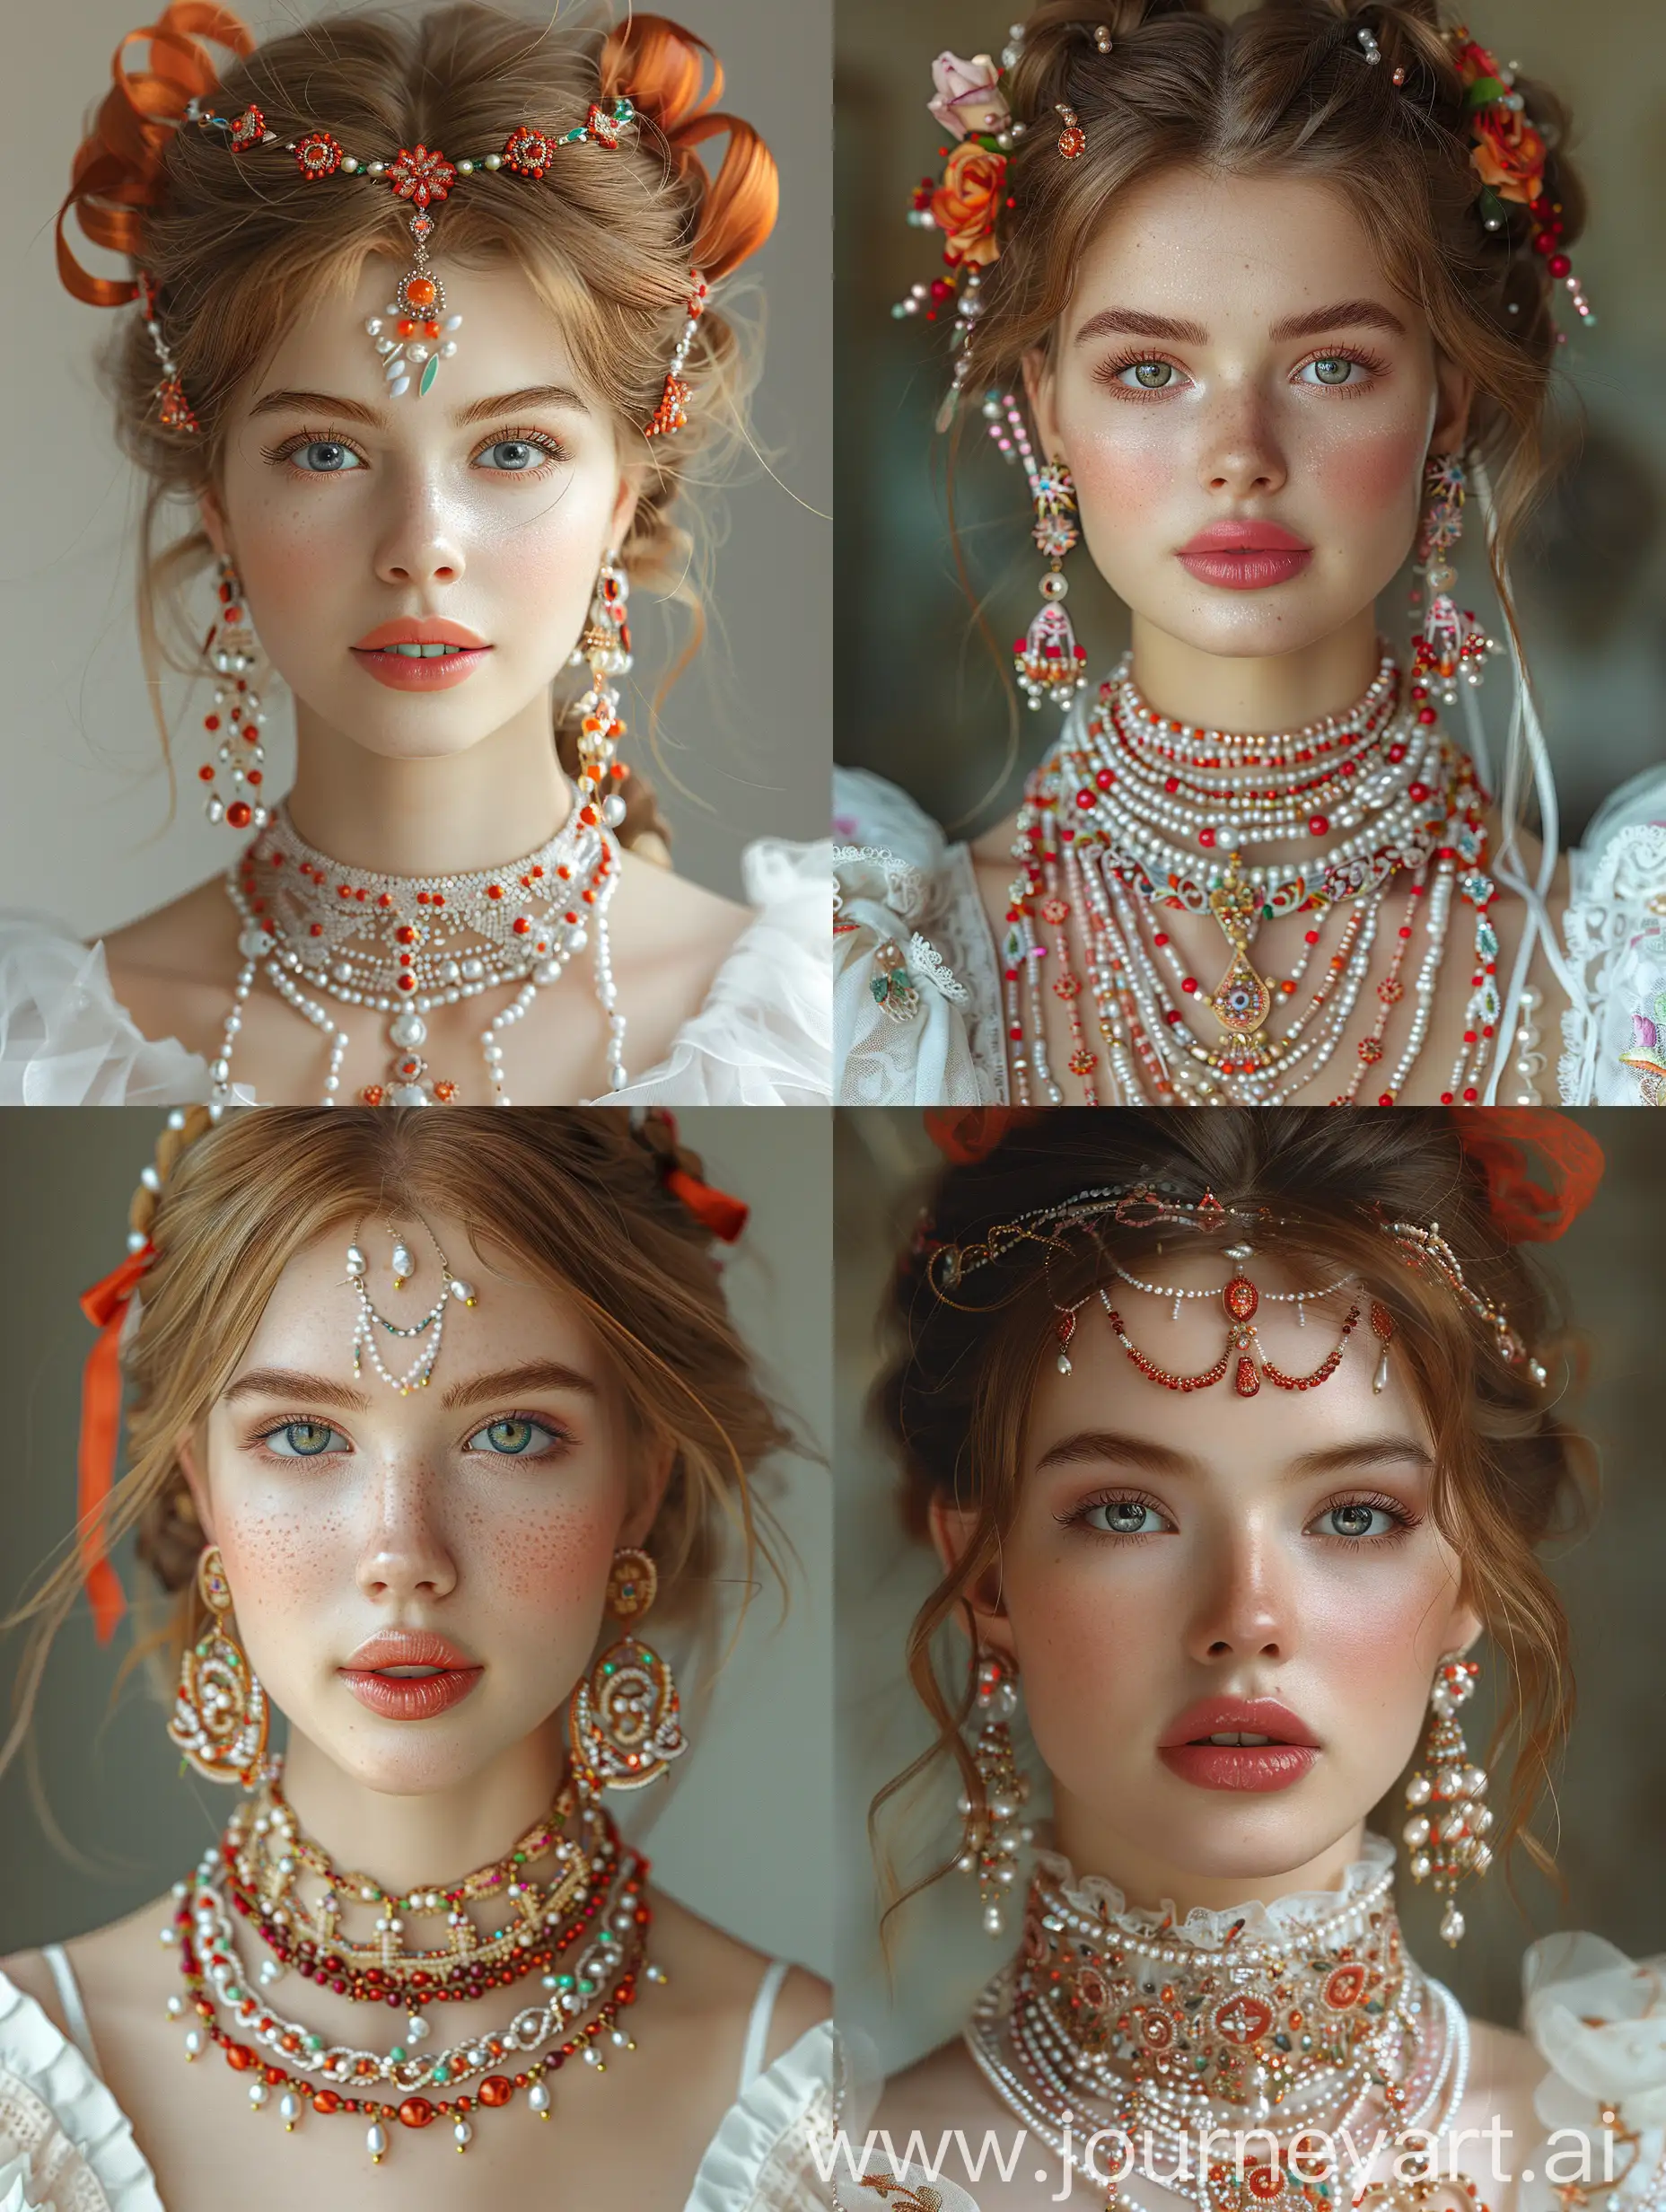 Russian girl, kokoshnik embroidered with multicolored mother-of-pearl threads, kokoshnik embroidered with colored beads, large jewelry in the form of red and white beads, bright silk ribbons in her hair, jewelry in Russian folk style, luxurious earrings and necklaces made of large beads, multi-tiered jewelry in folk style, Russian sundress, beautiful complex textures, complex combinations, clear detail, lots of interesting unusual details, light blush, juicy lips, realism. ГИПЕРРЕАЛИСТИЧНАЯ ФОТОГРАФИЯ —style raw —stylize 1000 —v 6
